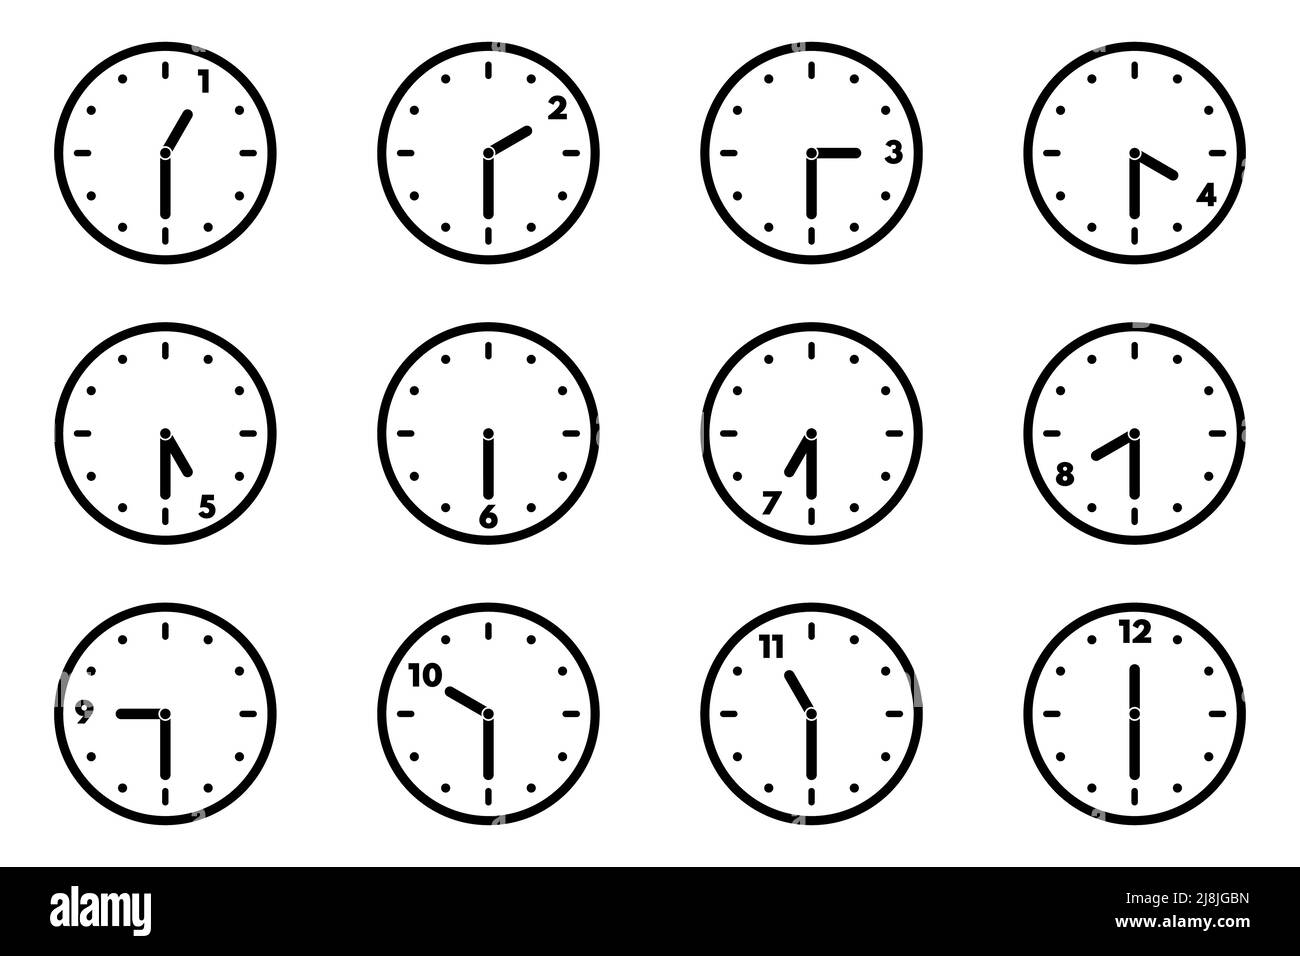 Set of analog clock icon for every hour and half. 12 hour clock. Half past hours version. Vector illustration Stock Vector